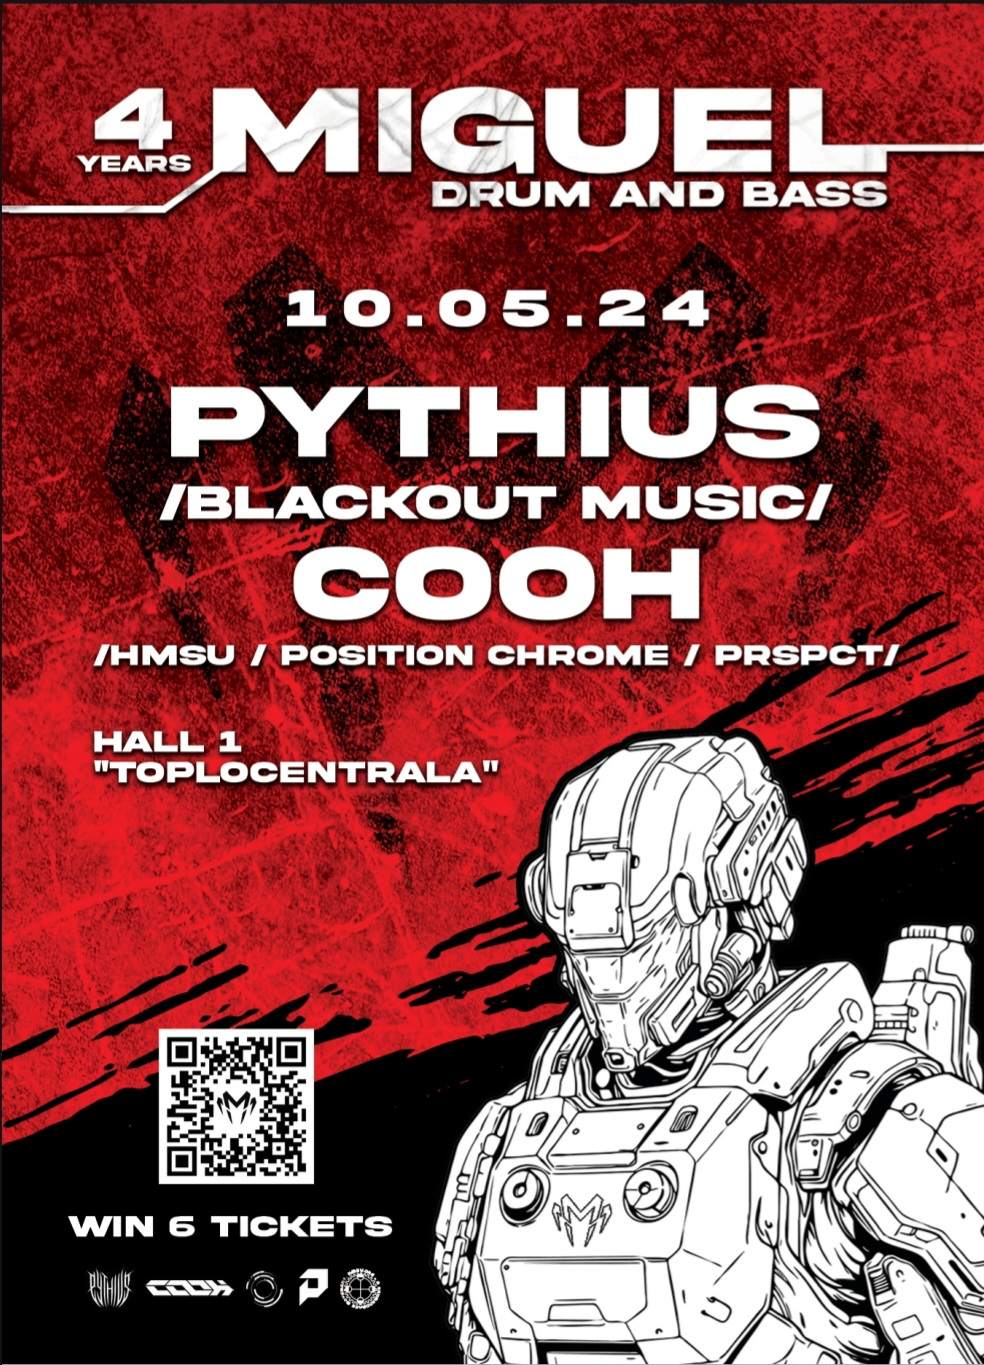 4 YEARS MIGUEL W/ Pythius & COOH - フライヤー表